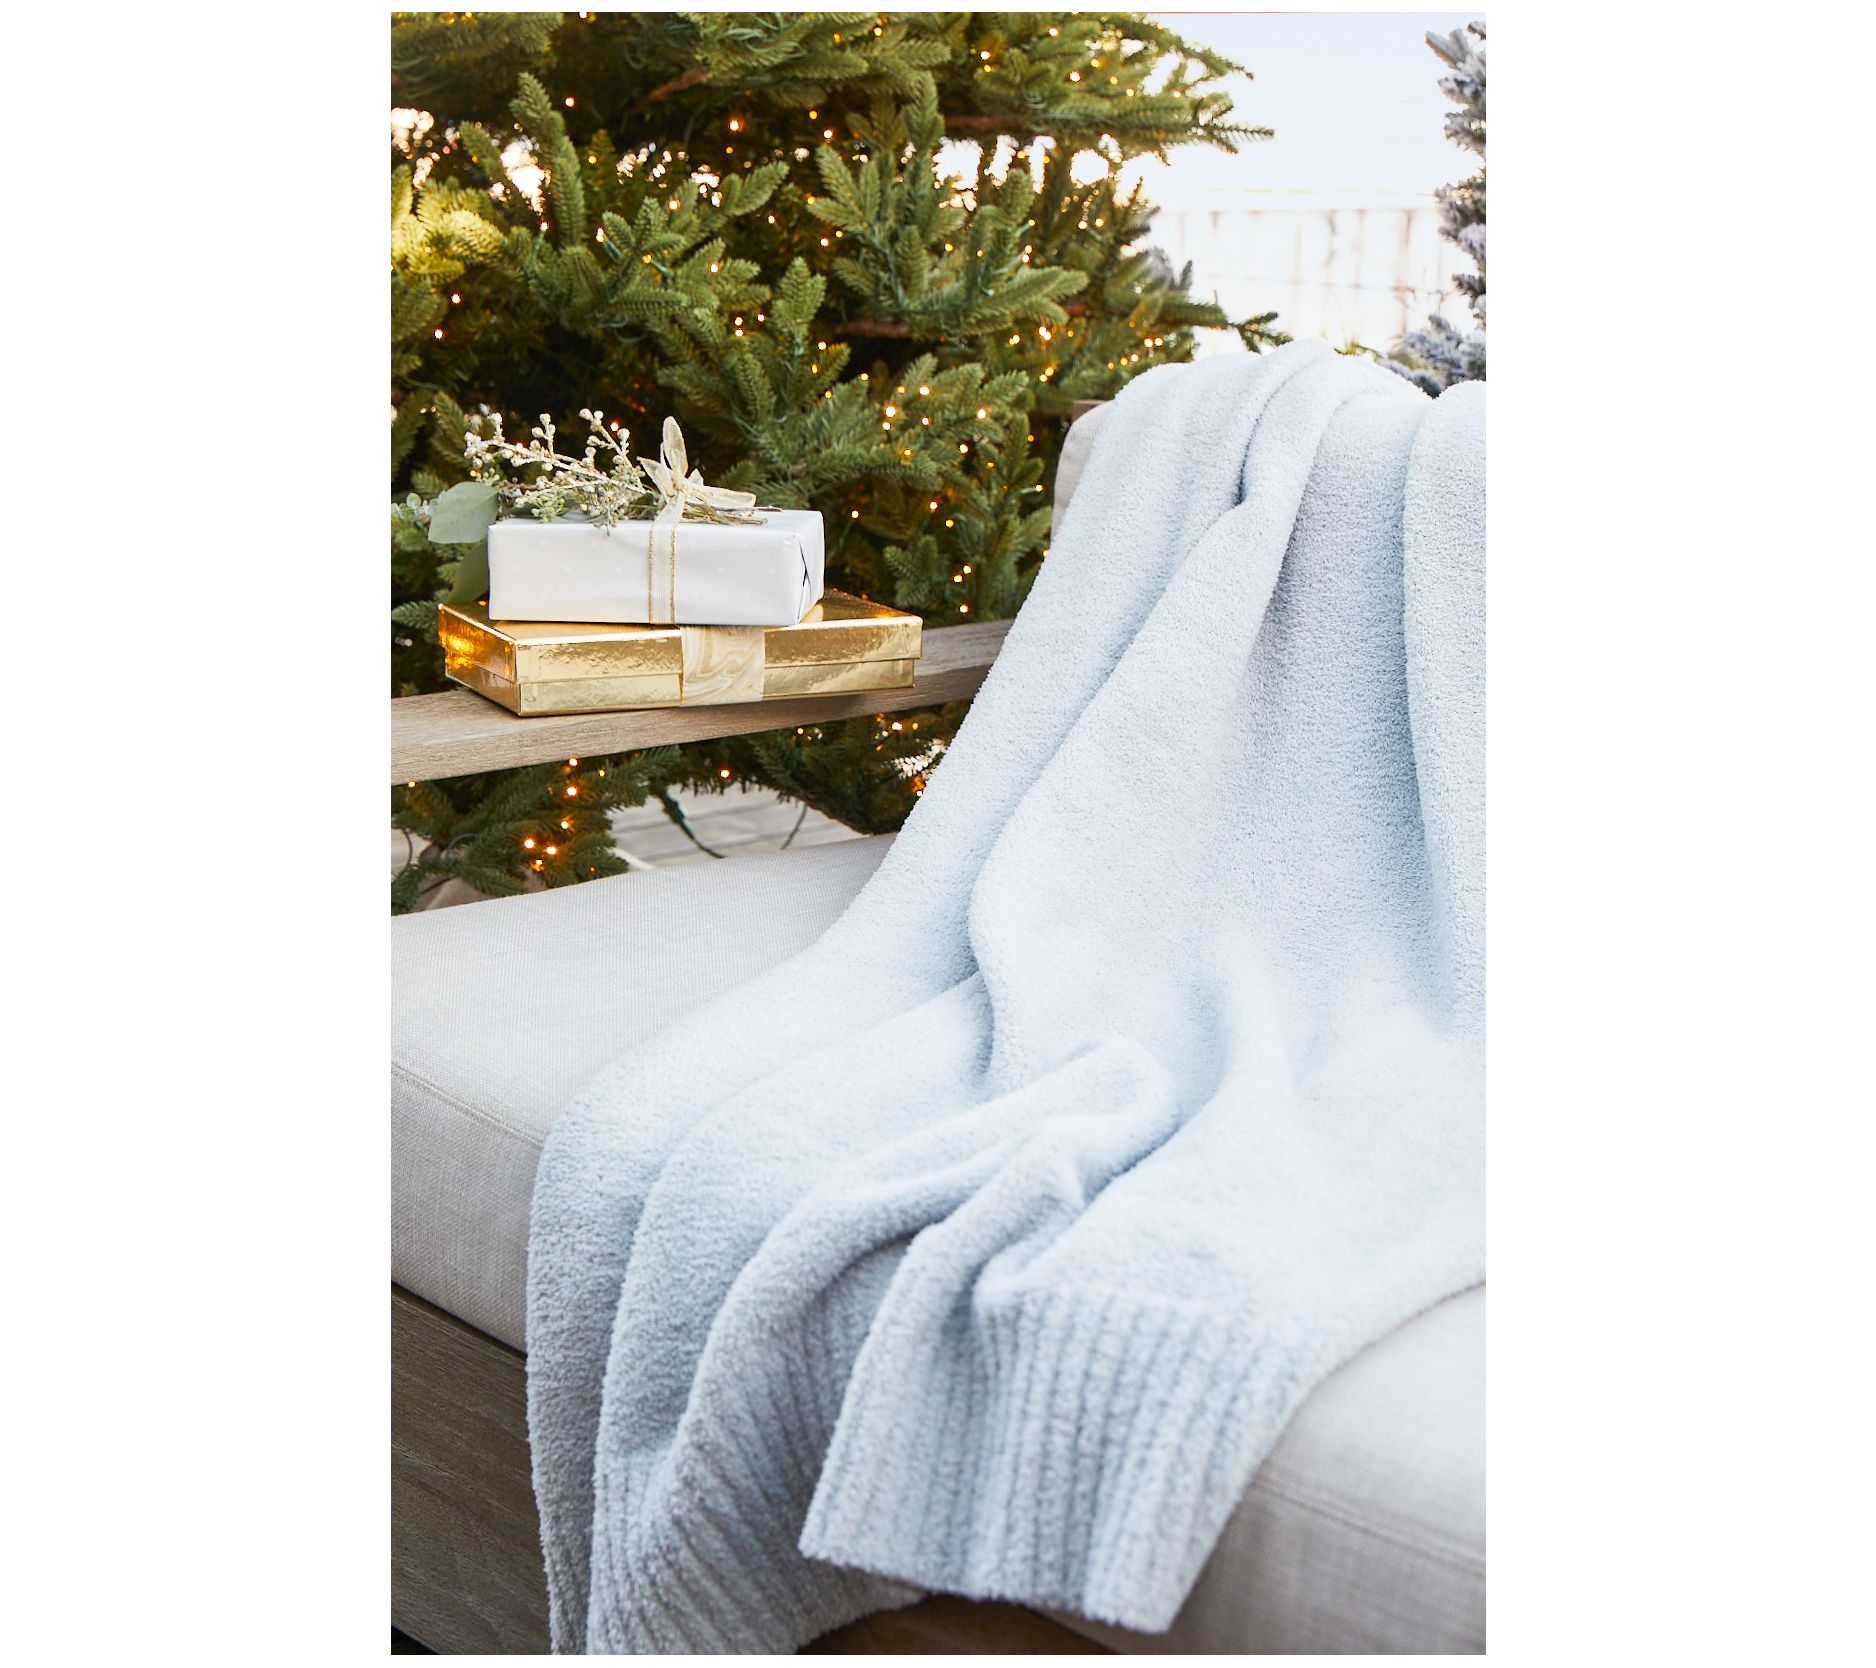 BRAND NEW Barefoot Dreams CozyChic Blanket Charcoal/White 45” X 60